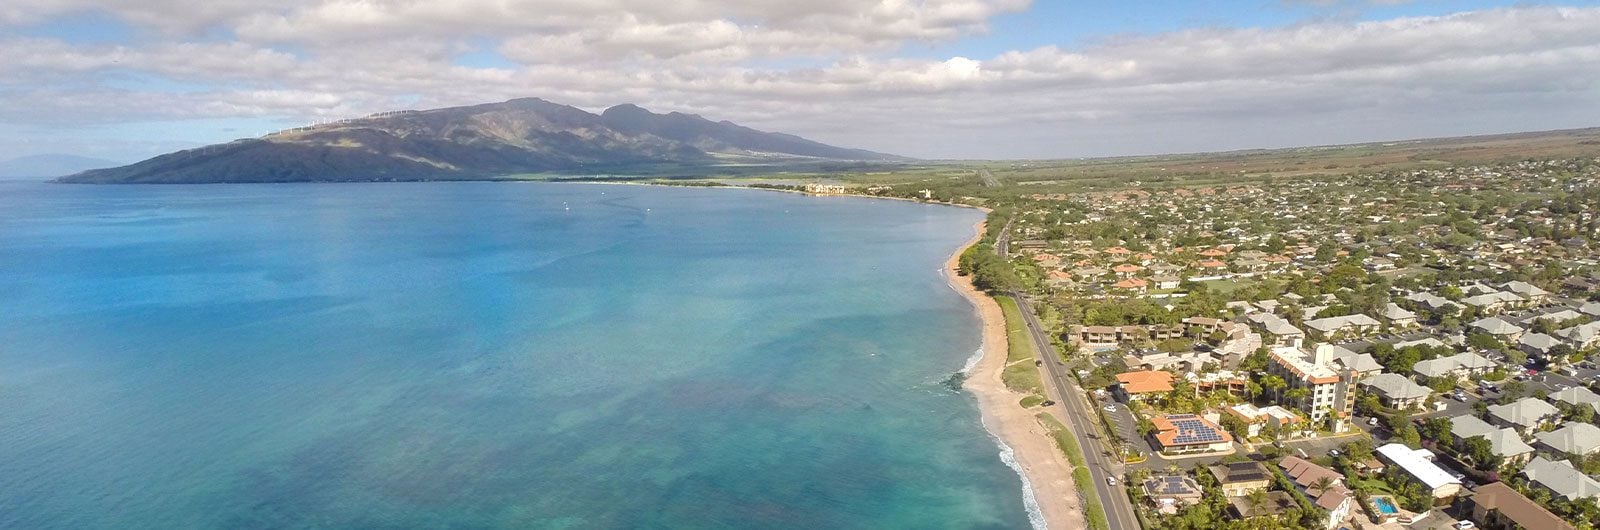 10 Things You Don’t Want to Miss in Kihei